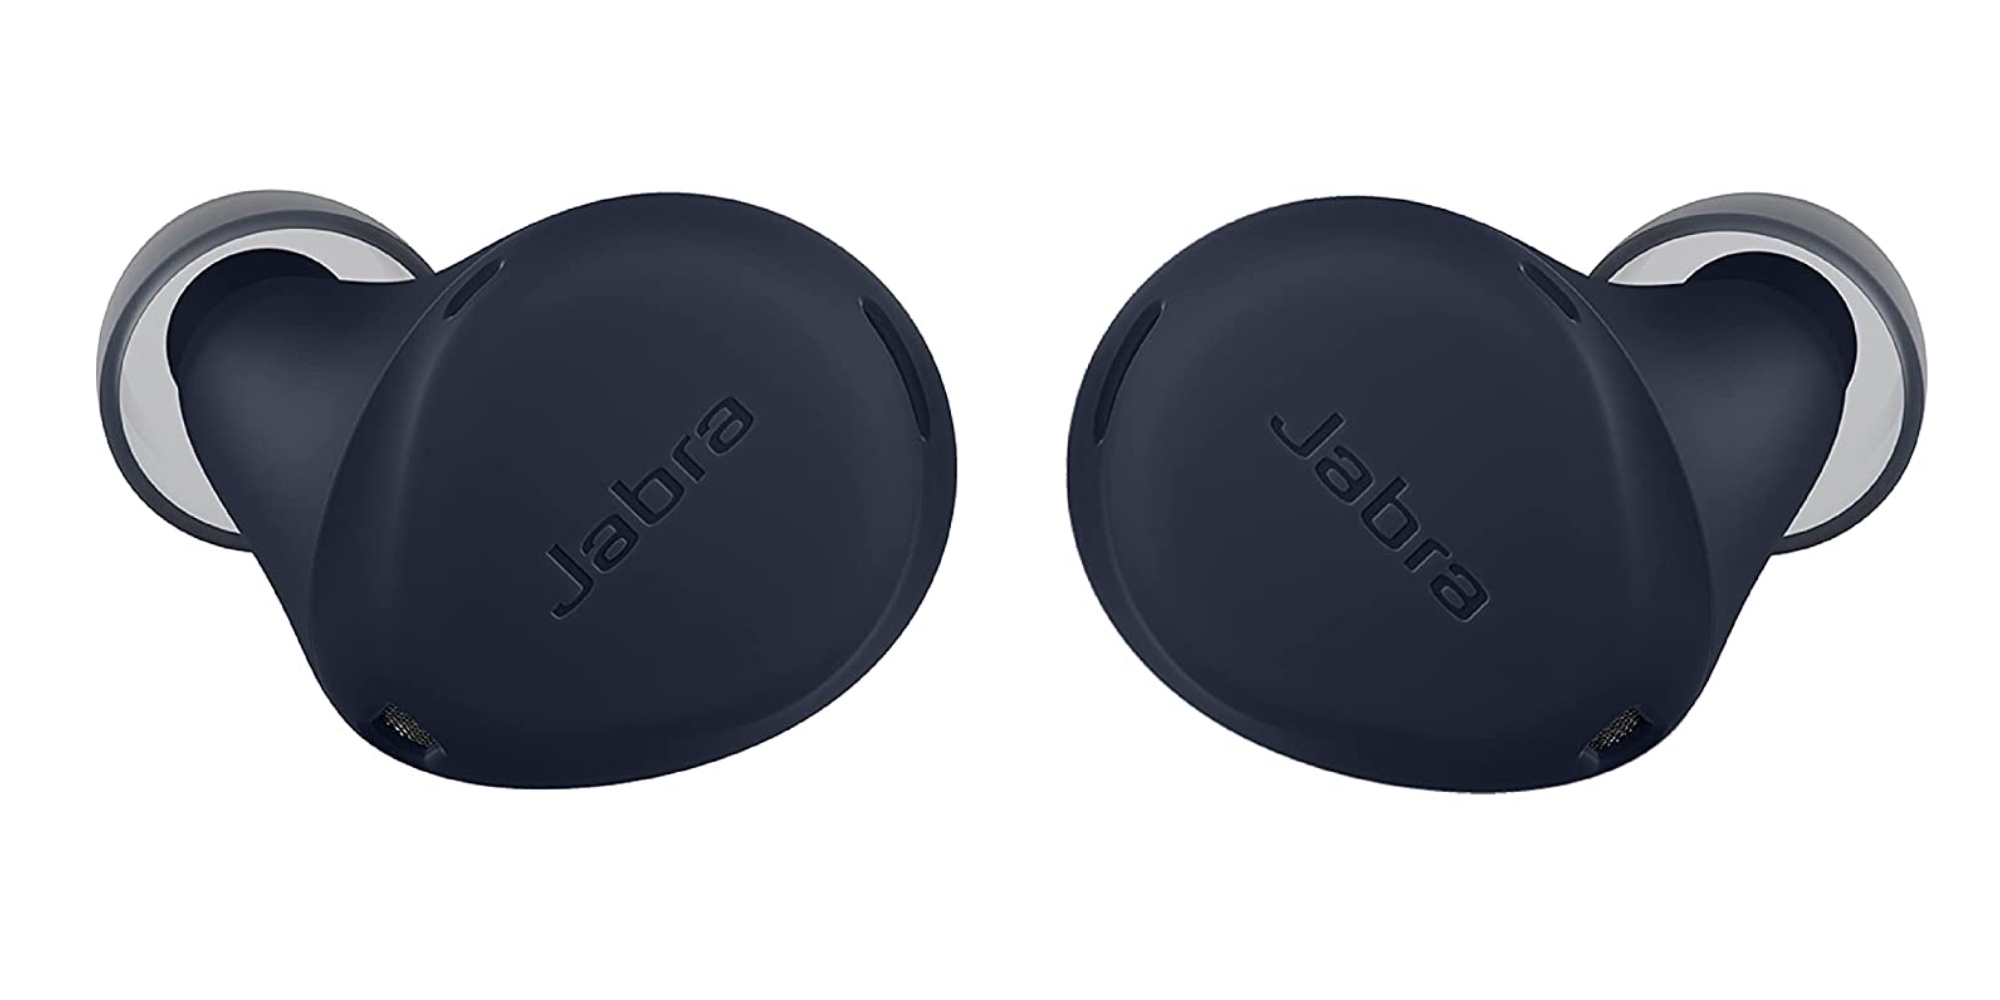 Jabra Elite 7 Active earbuds pack ANC into a rugged design with 